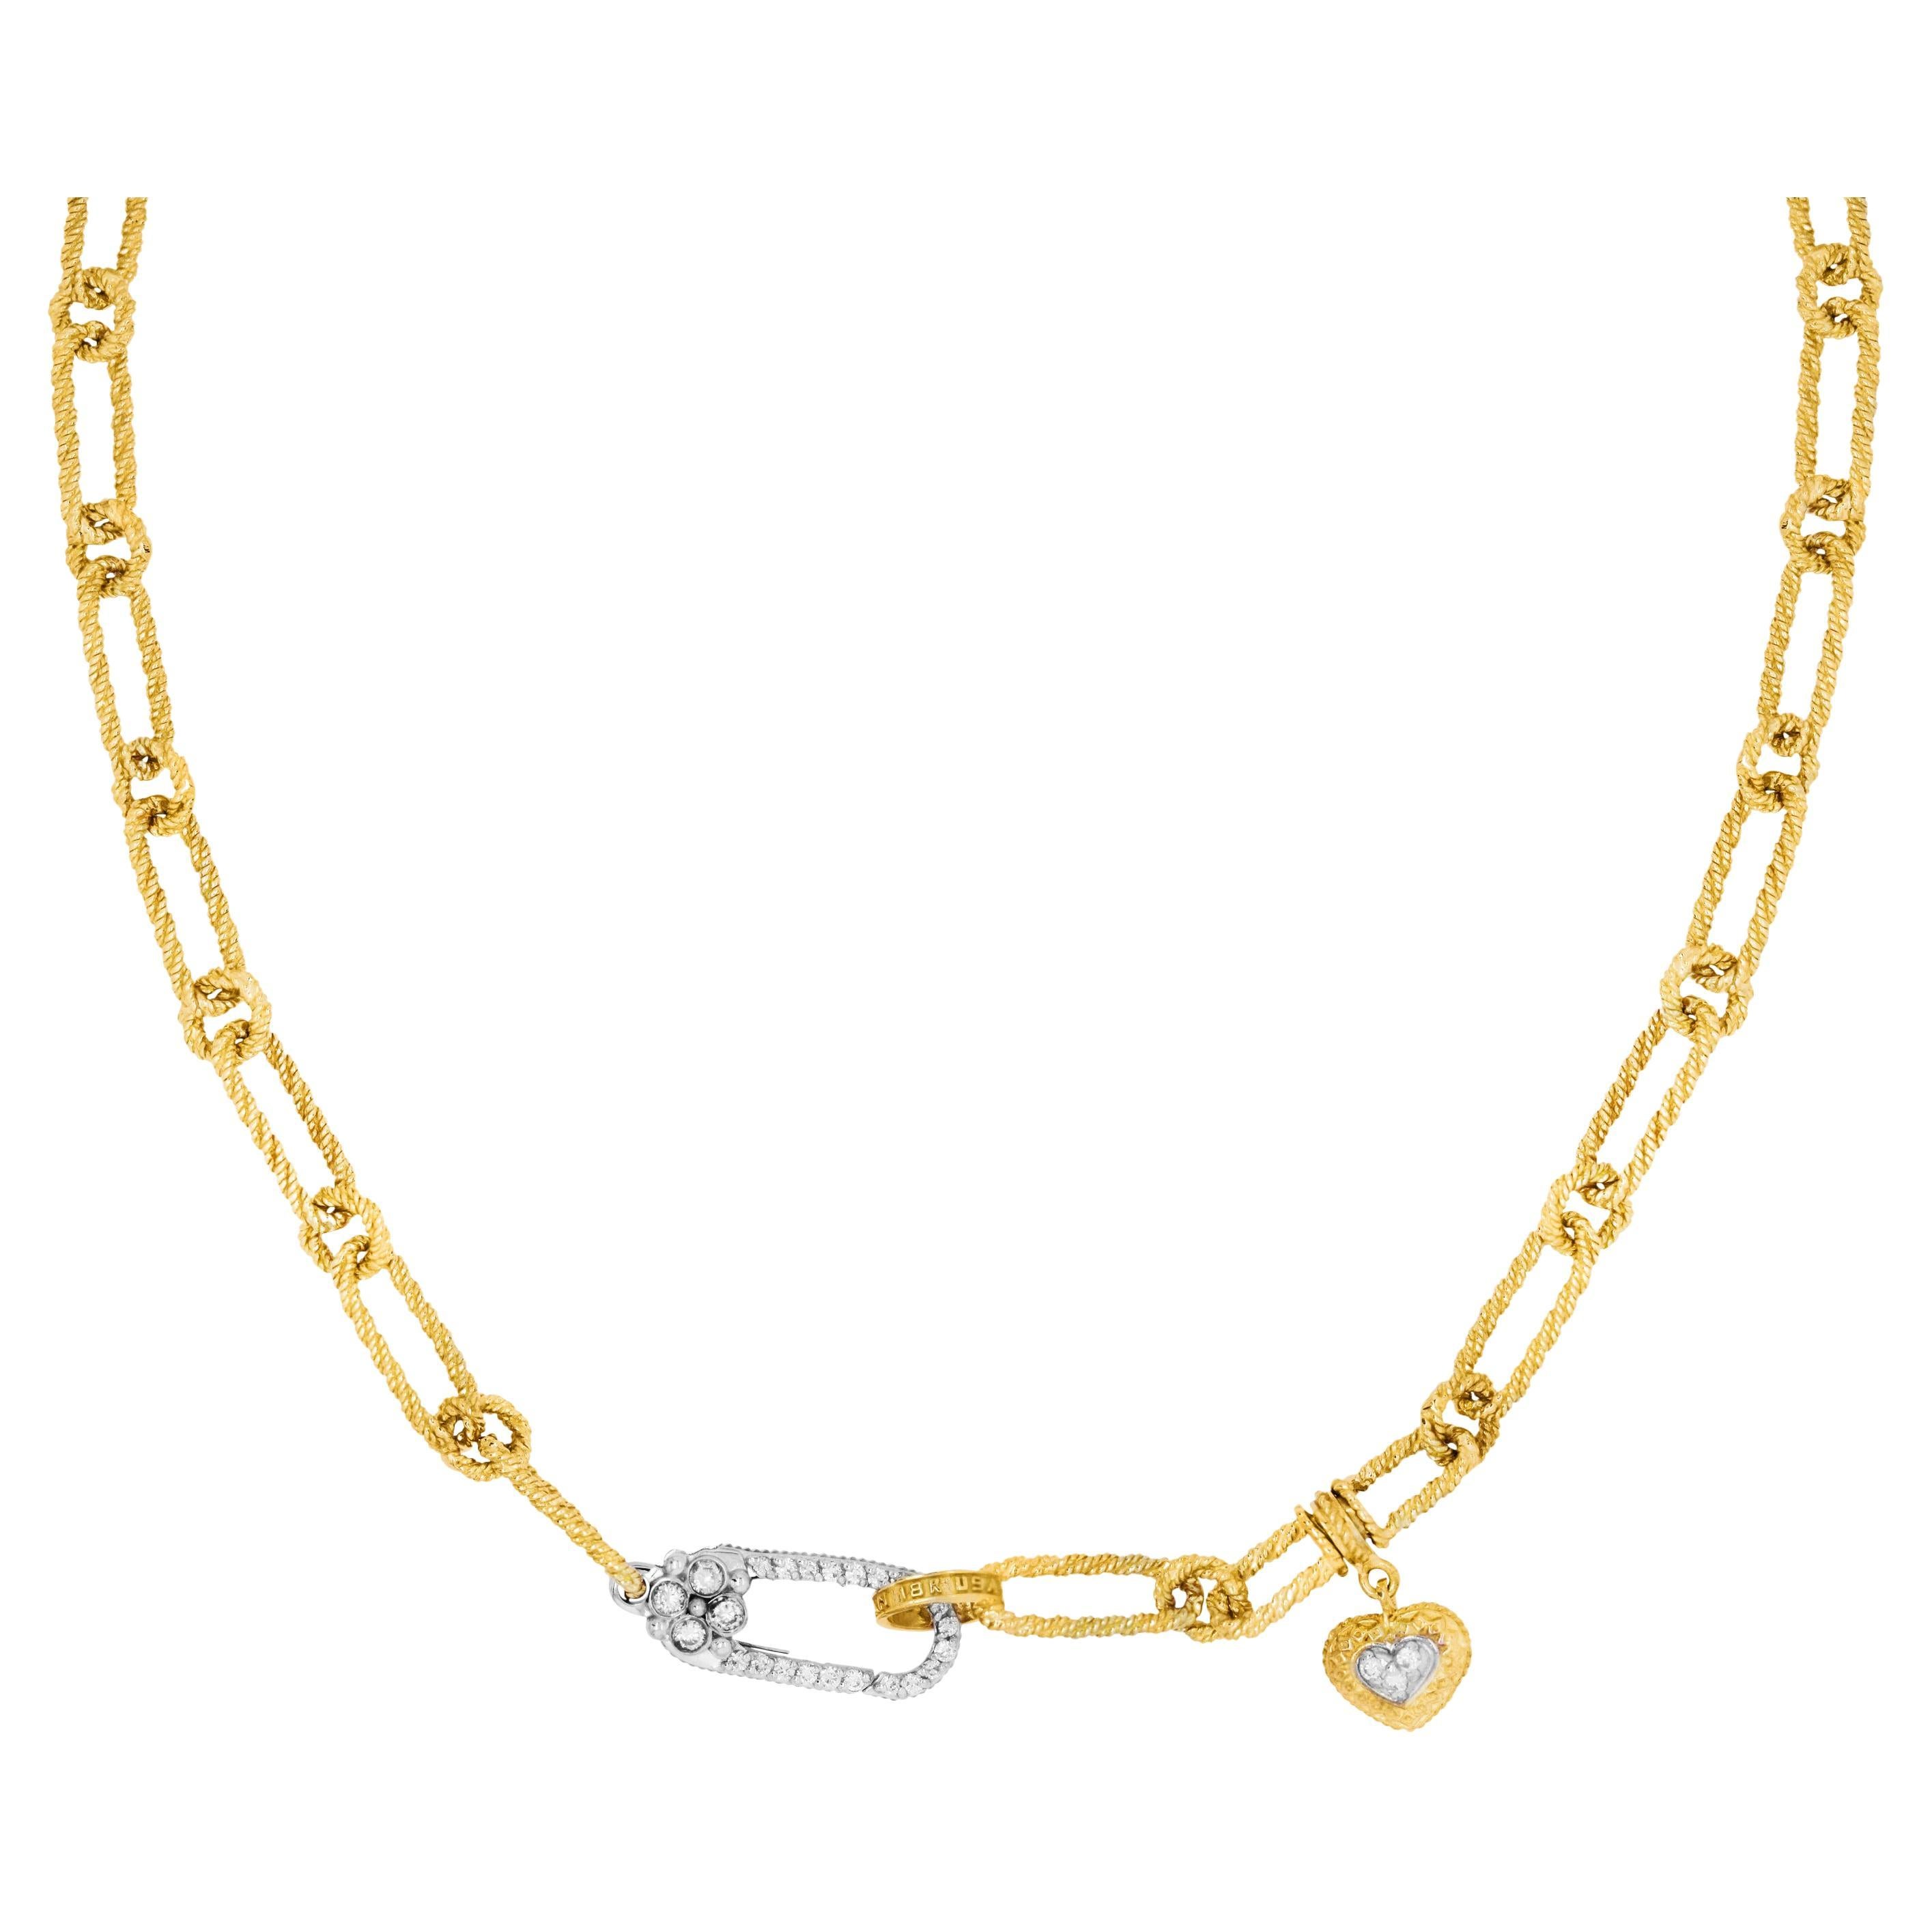 Stambolian 18K Yellow White Gold Diamonds Dangling Heart Oval Link Necklace For Sale